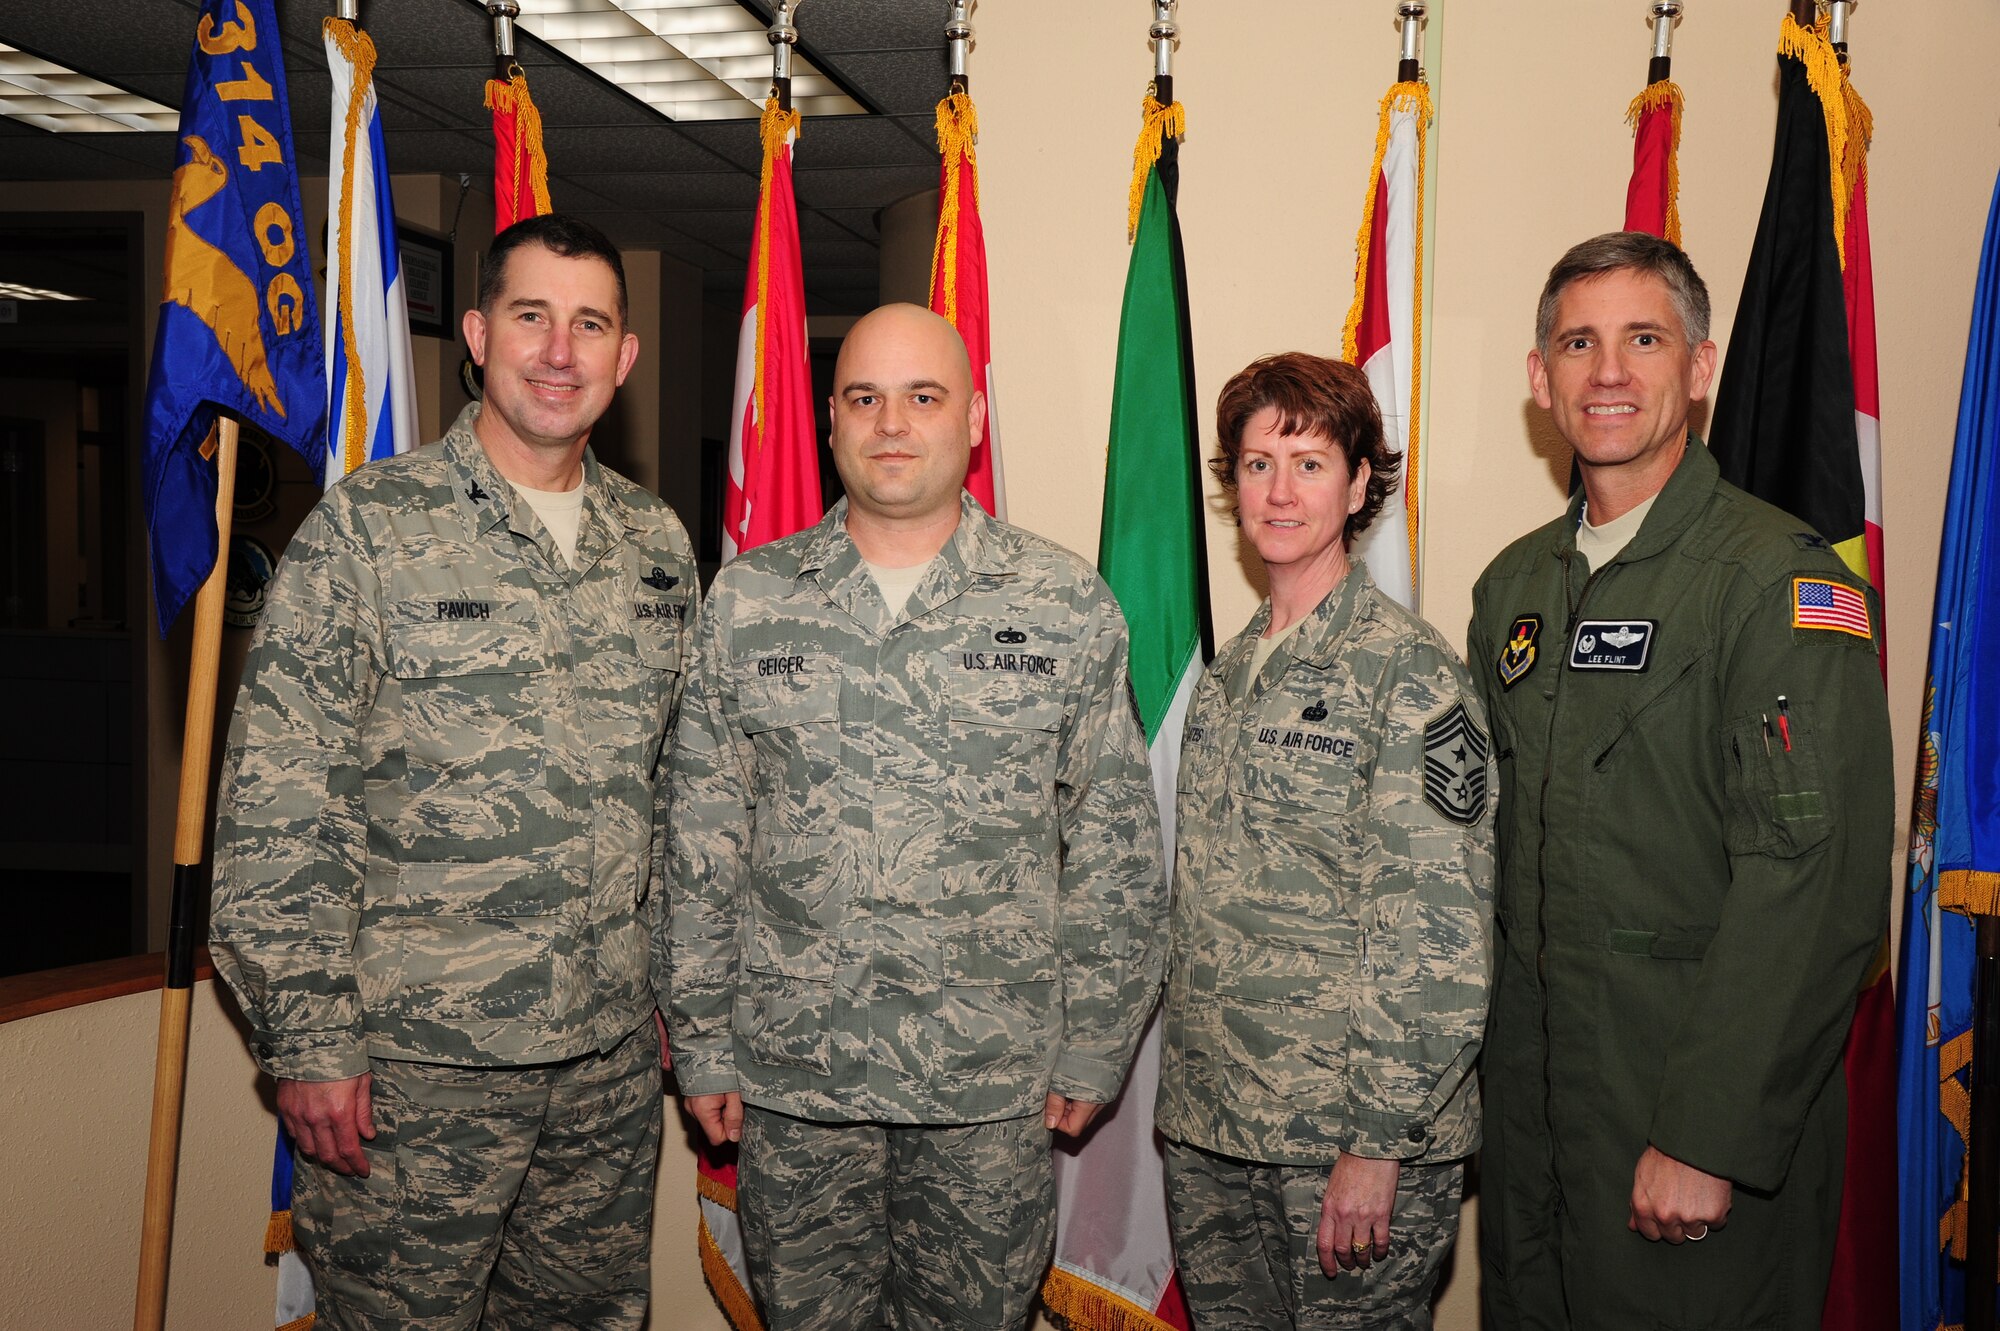 Master Sgt. Timothy Geiger (second from the left), 714th Training Squadron noncommissioned officer in charge of international students, is recognized as the Combat Airlifter of the Week Feb. 12, 2013, by Col. Todd Pavich (far left), 314th Airlift Wing vice commander, Chief Master Sgt. Andrea Gates, 314th AW command chief master sergeant and Col. Lee Flint, 314th Operations Group commnander. Gieger was recognized among his peers for his distinguished work as NCOIC of the international students on base. (U.S. Air Force photo by Airman 1st Class Kaylee Clark)